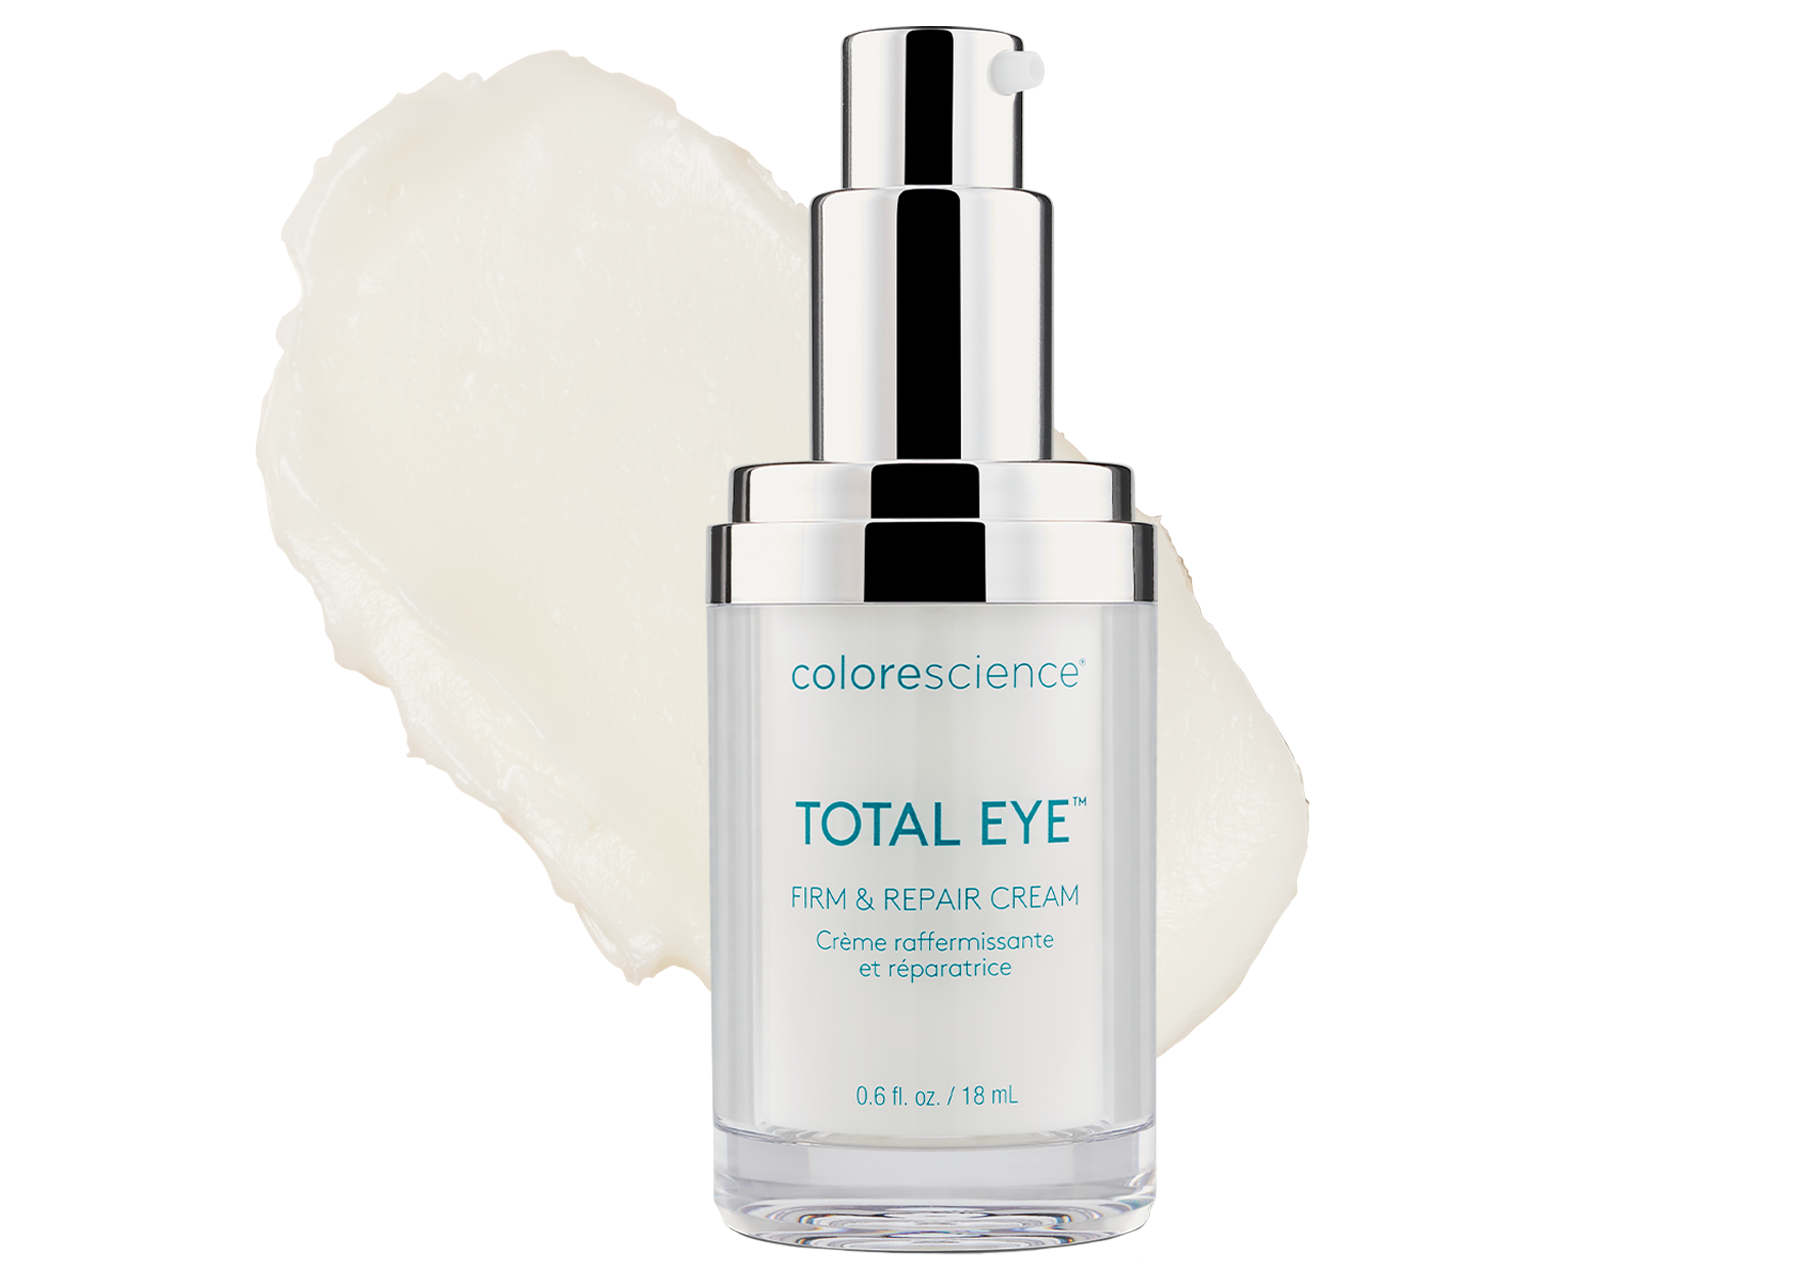 total eye cream with swatch